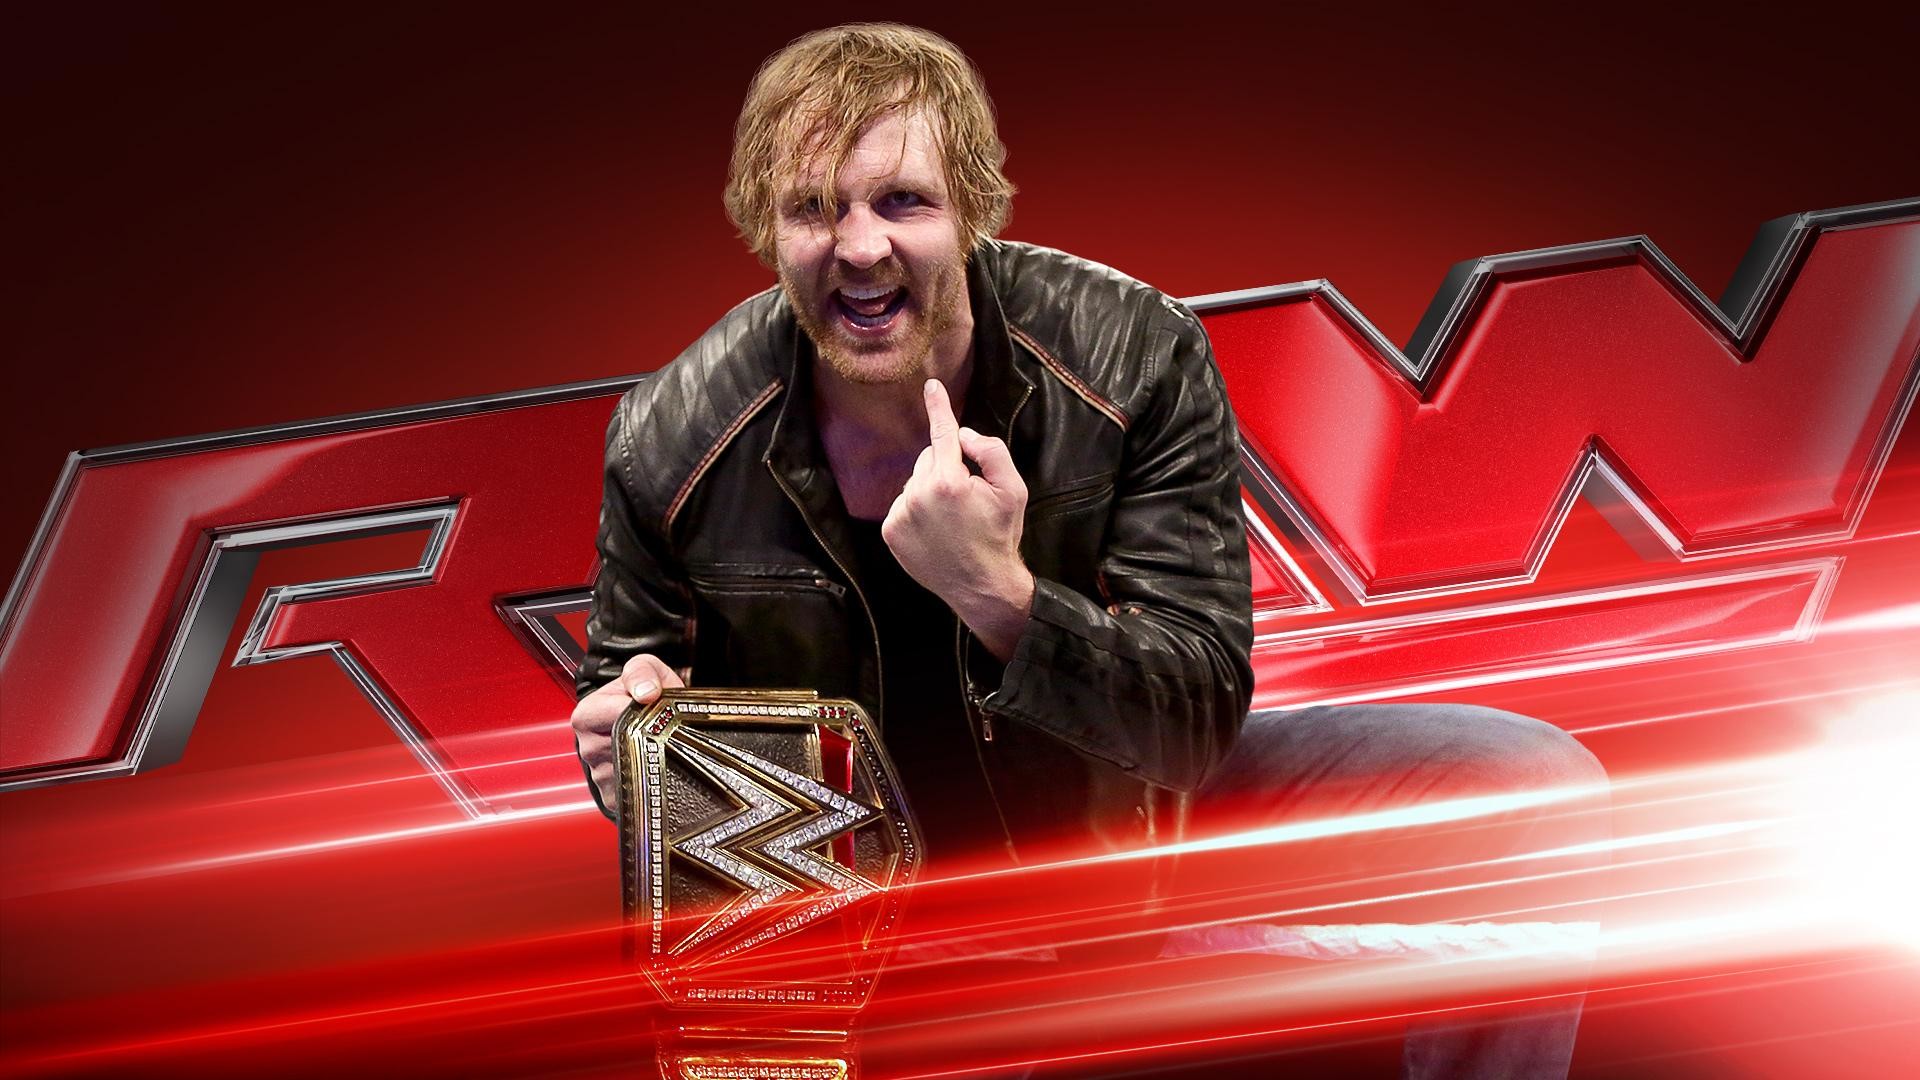 1920x1080 WWE Monday Night Raw Preview for 06.27.2016: Dean Ambrose Reigns, Roman  Vanishes, Cena Needs Backup, The Brand Split 2.0 Looms Large